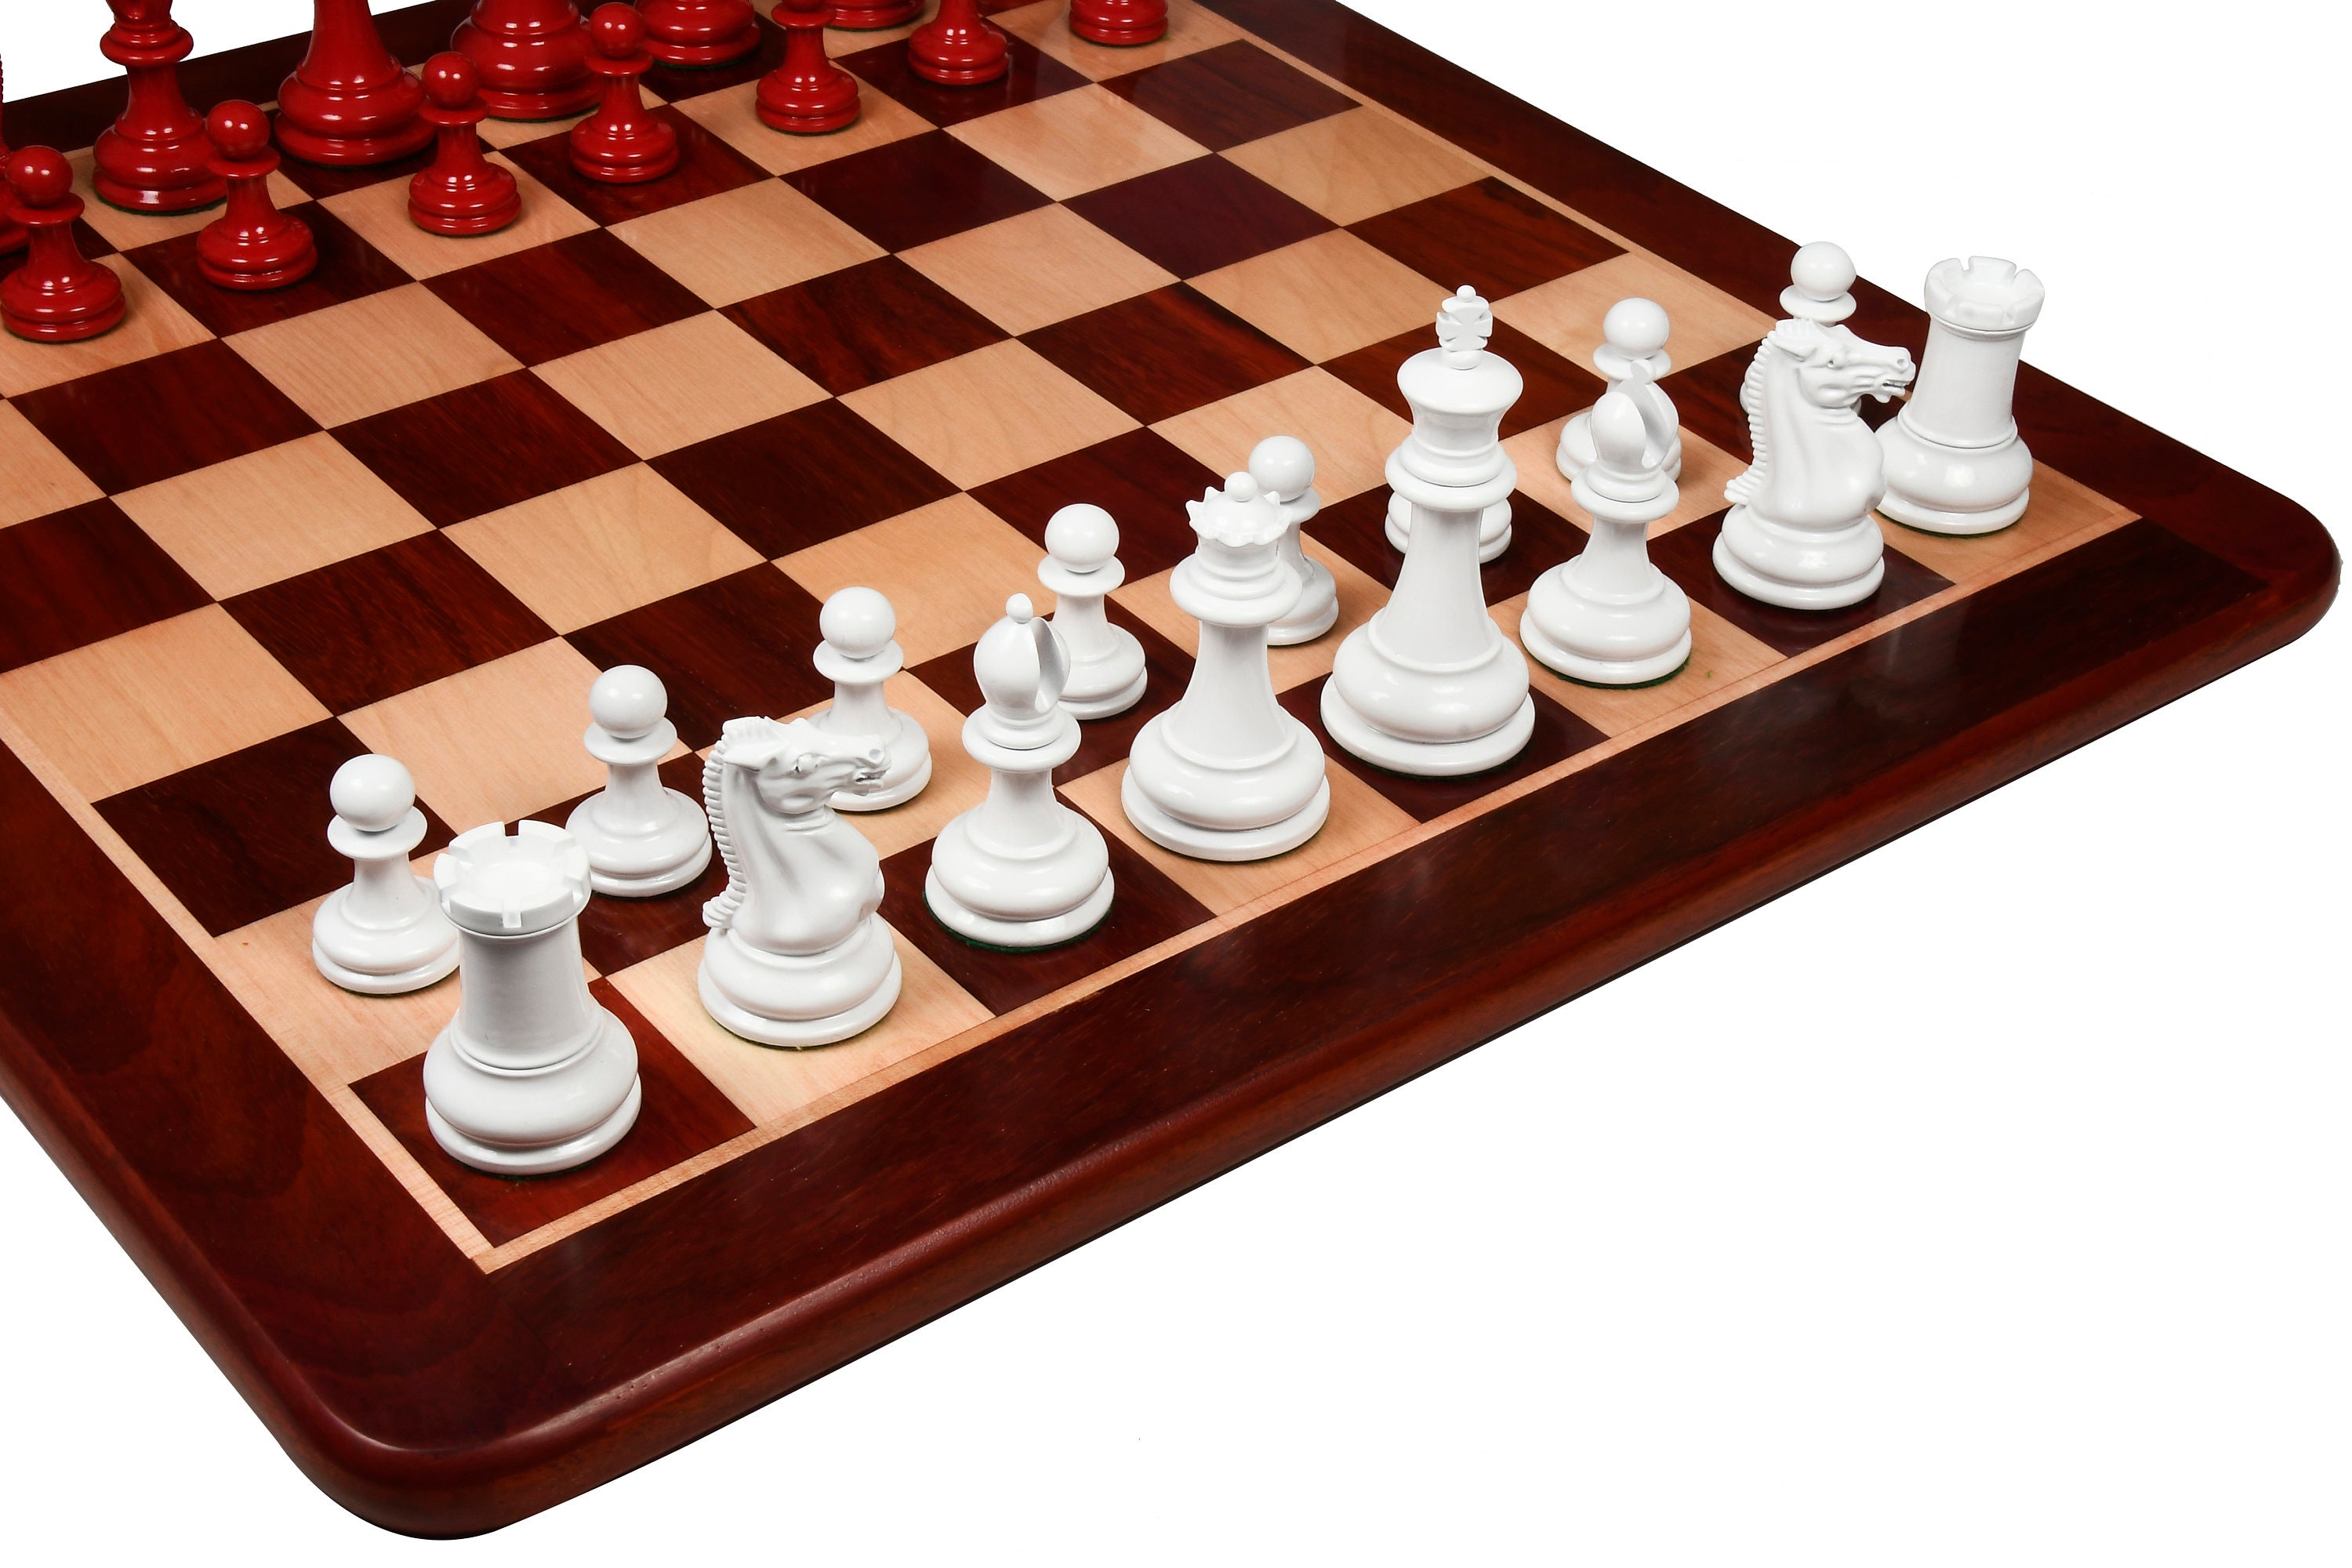 Wooden Chess Board Pieces Arranged Starting Stock Photo 684556210